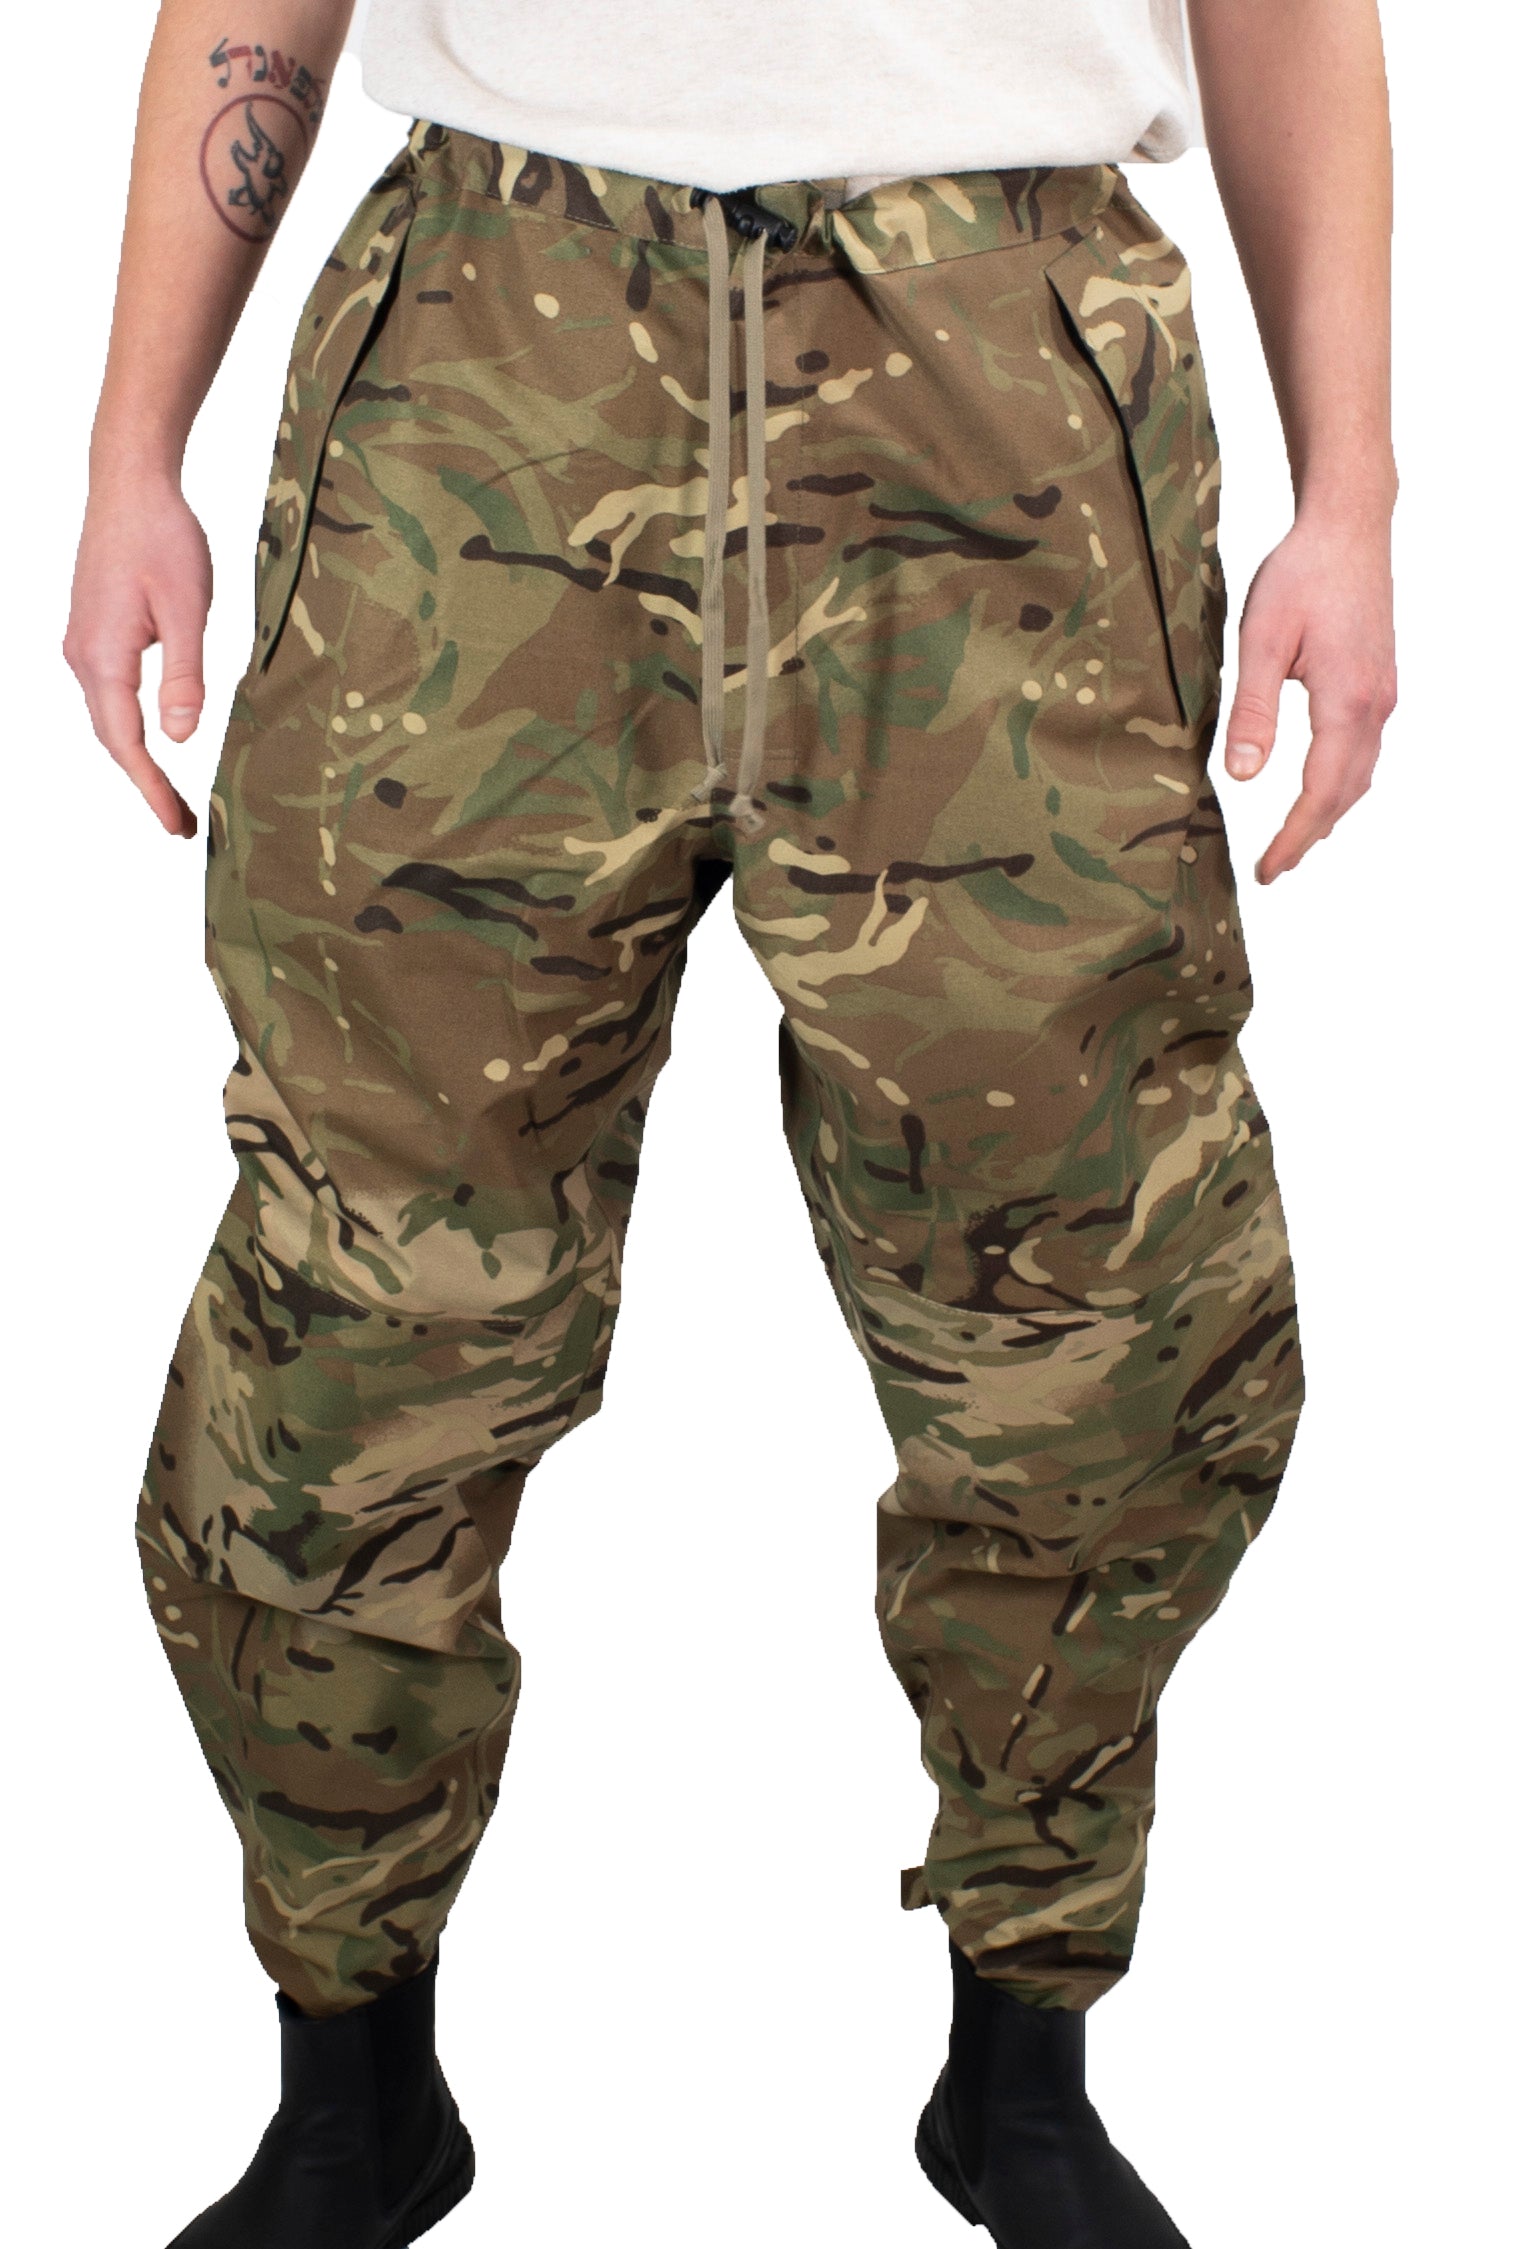 Rent or Buy Para Military Commando Kids Fancy Dress Costume in India